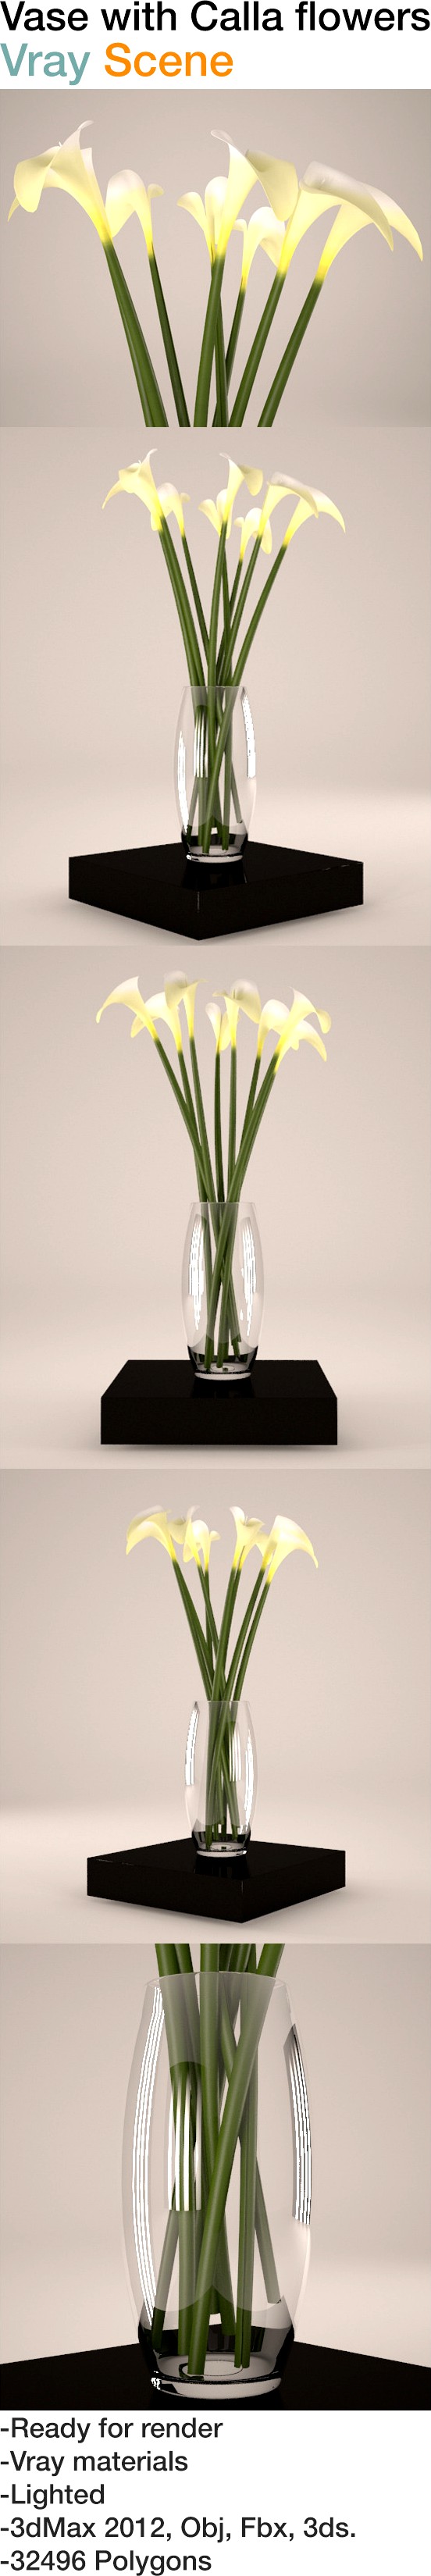 Vase with calla flowers